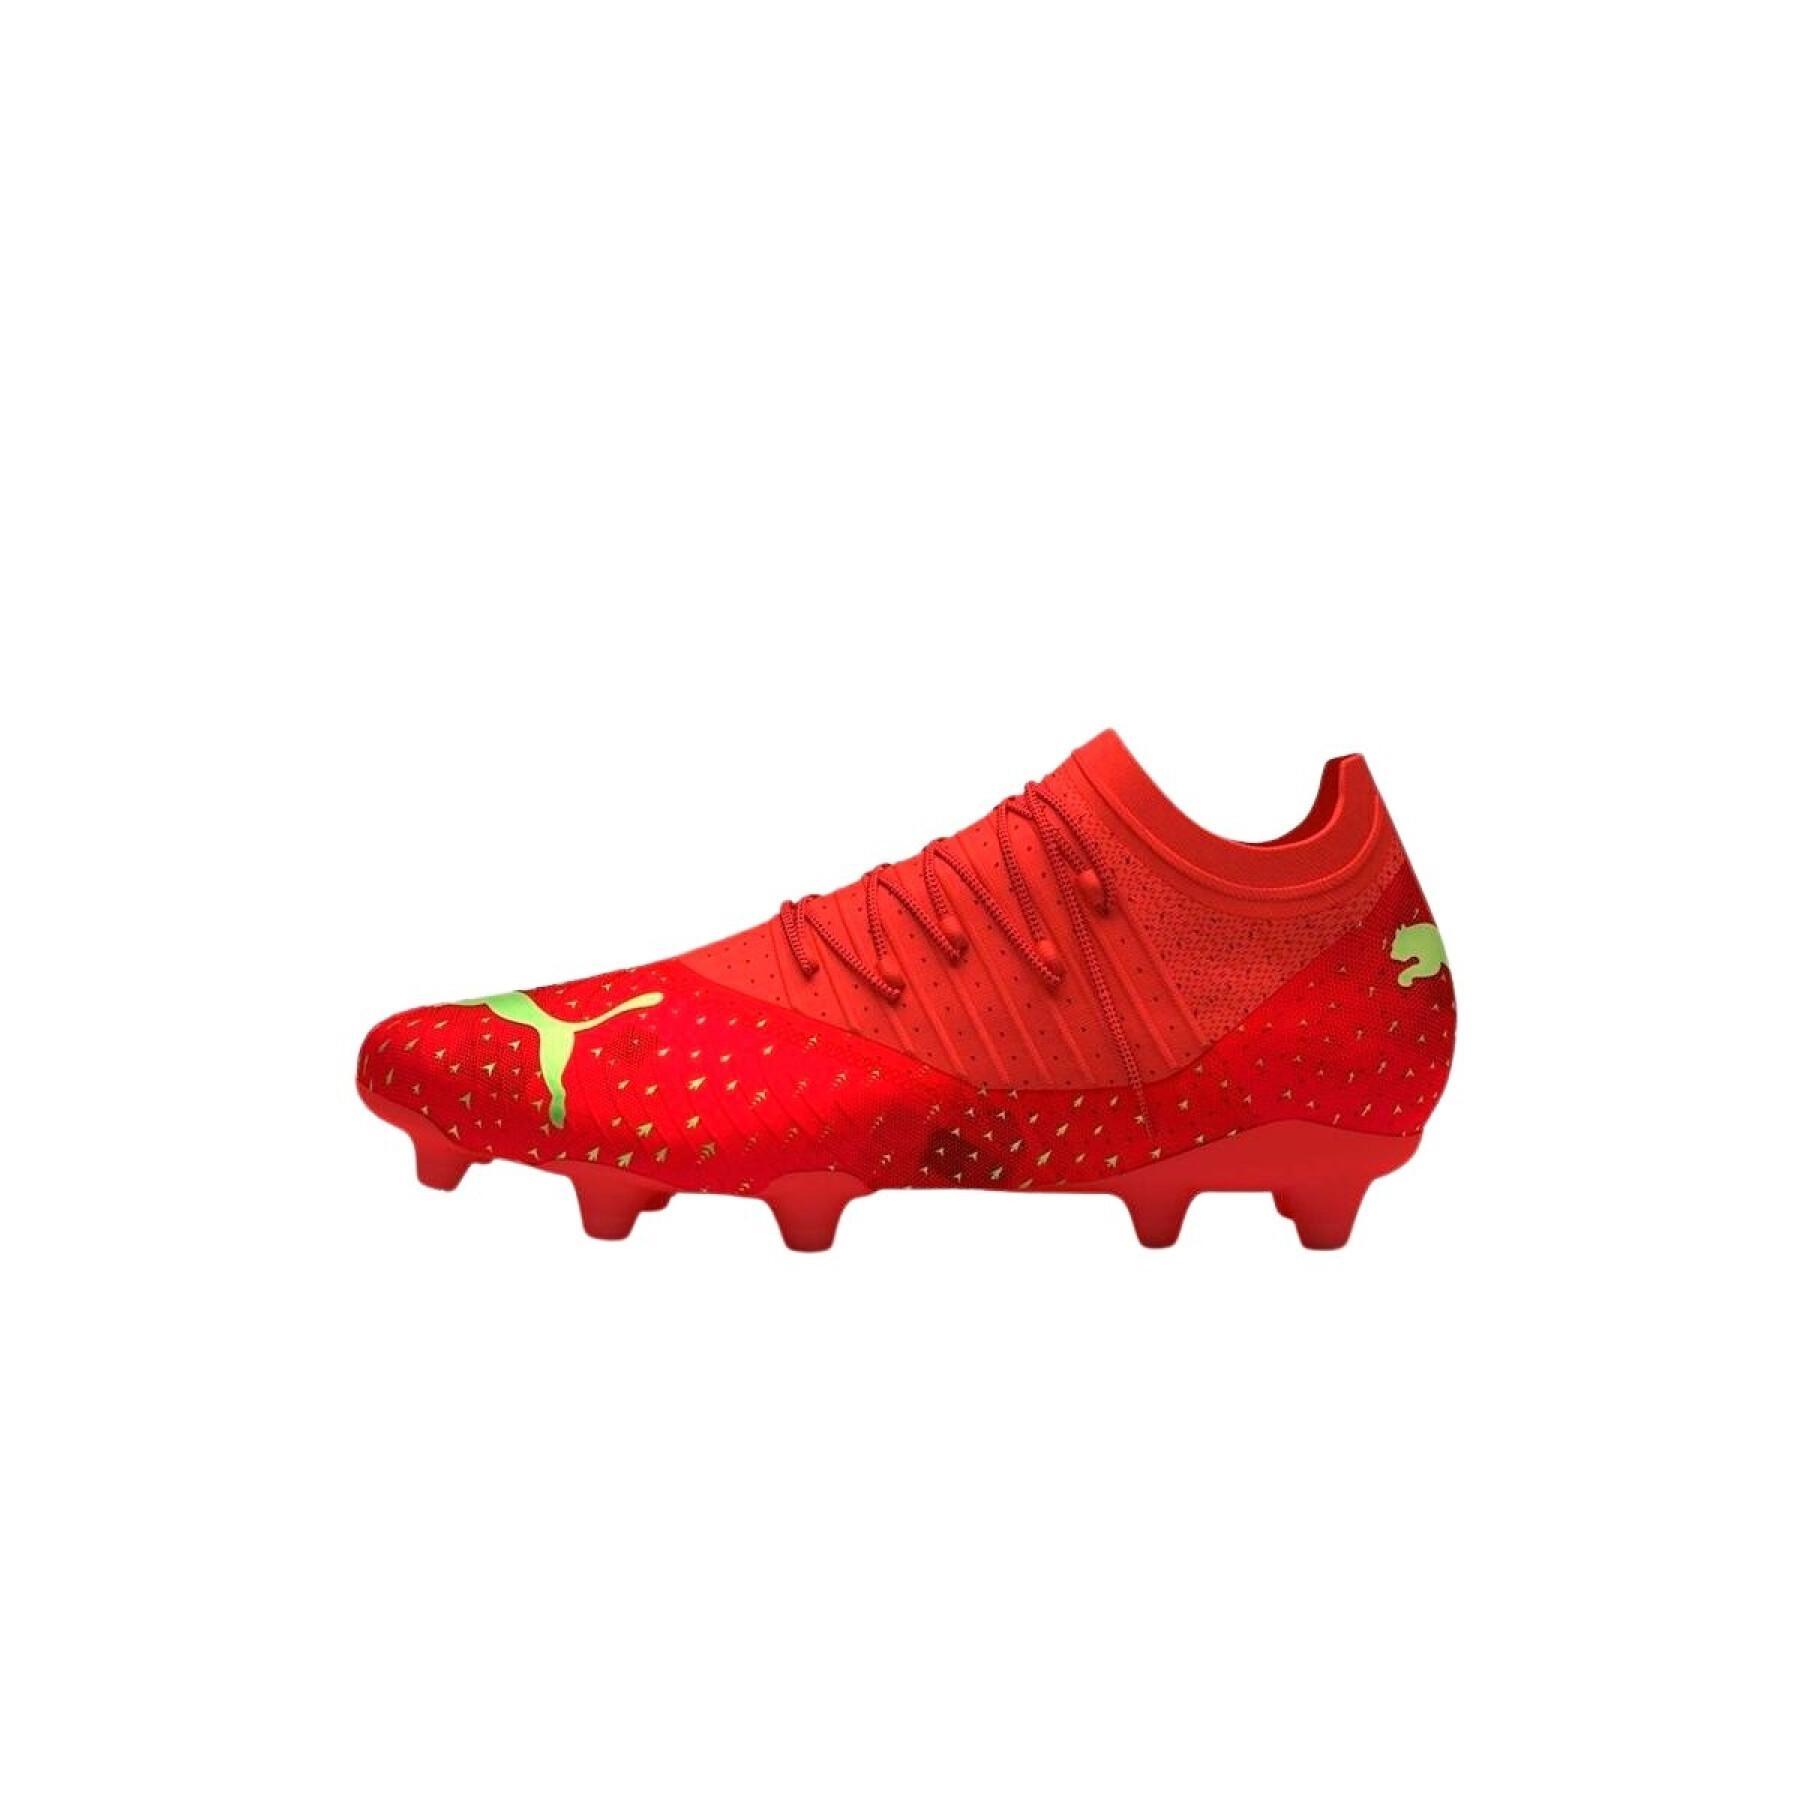 Soccer shoes Puma Future Z 2.4 FG/AG - Fearless Pack